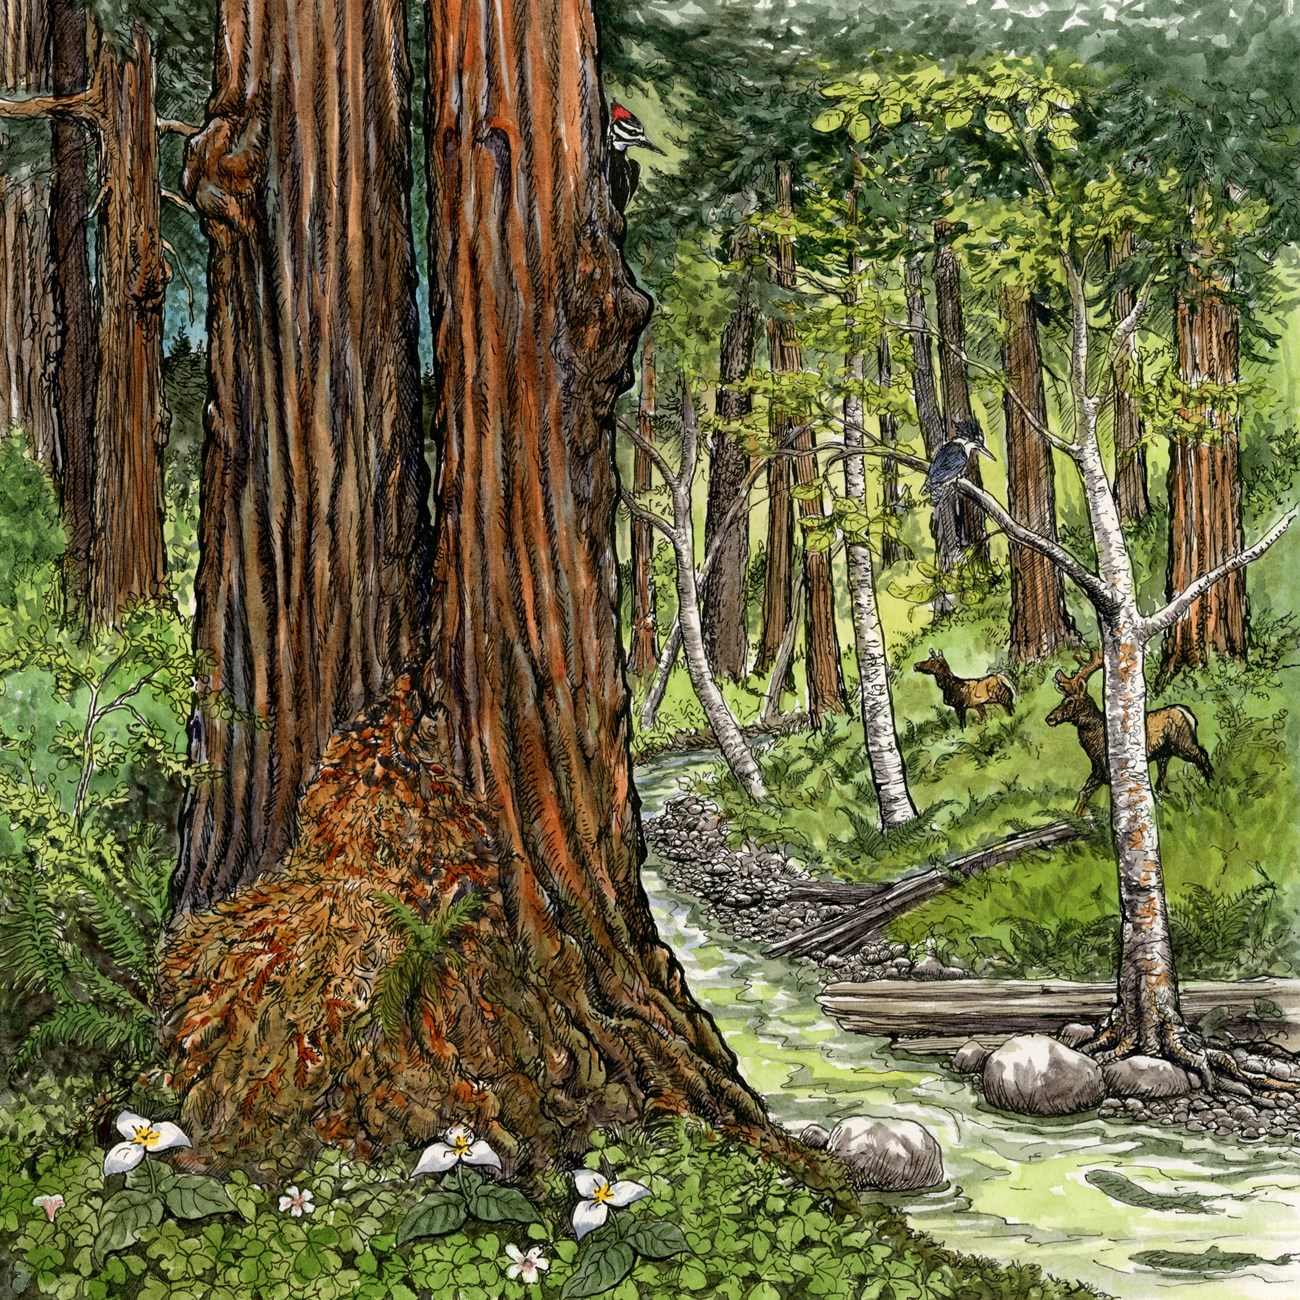 Illustration of a complex and healthy river and forest